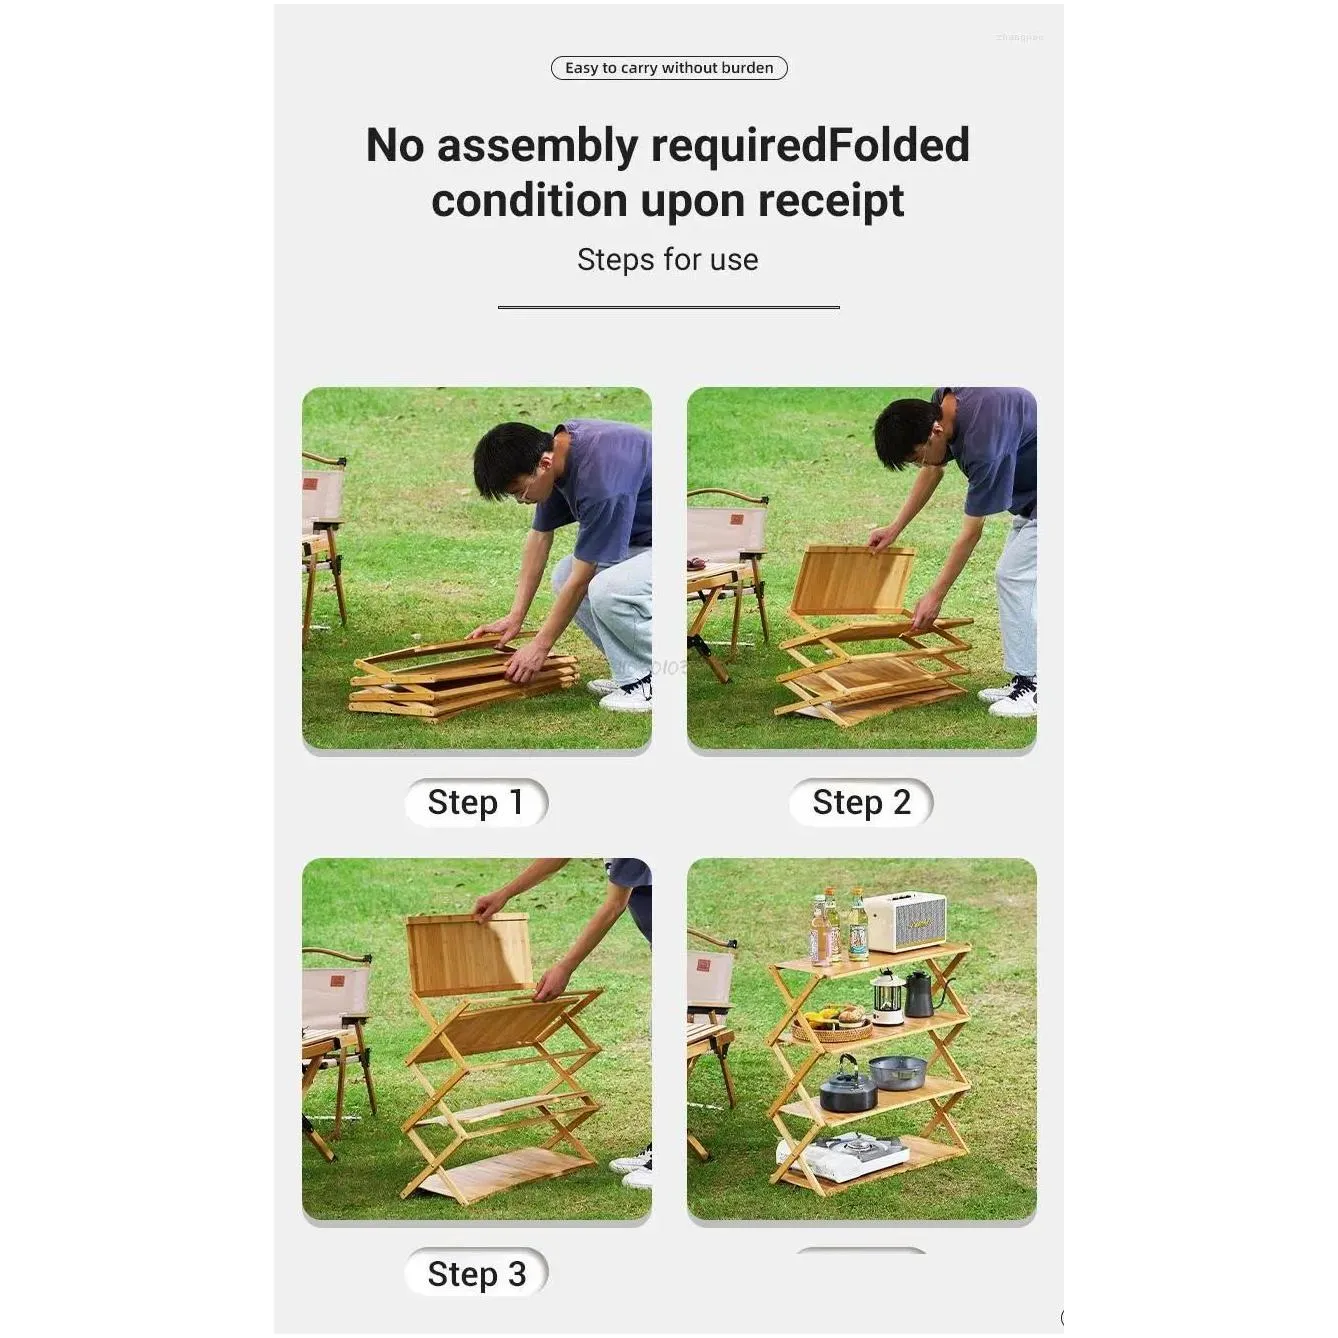 camp furniture outdoor camping bamboo shelves foldable 3-5-layer storage rack portable table flower shoe